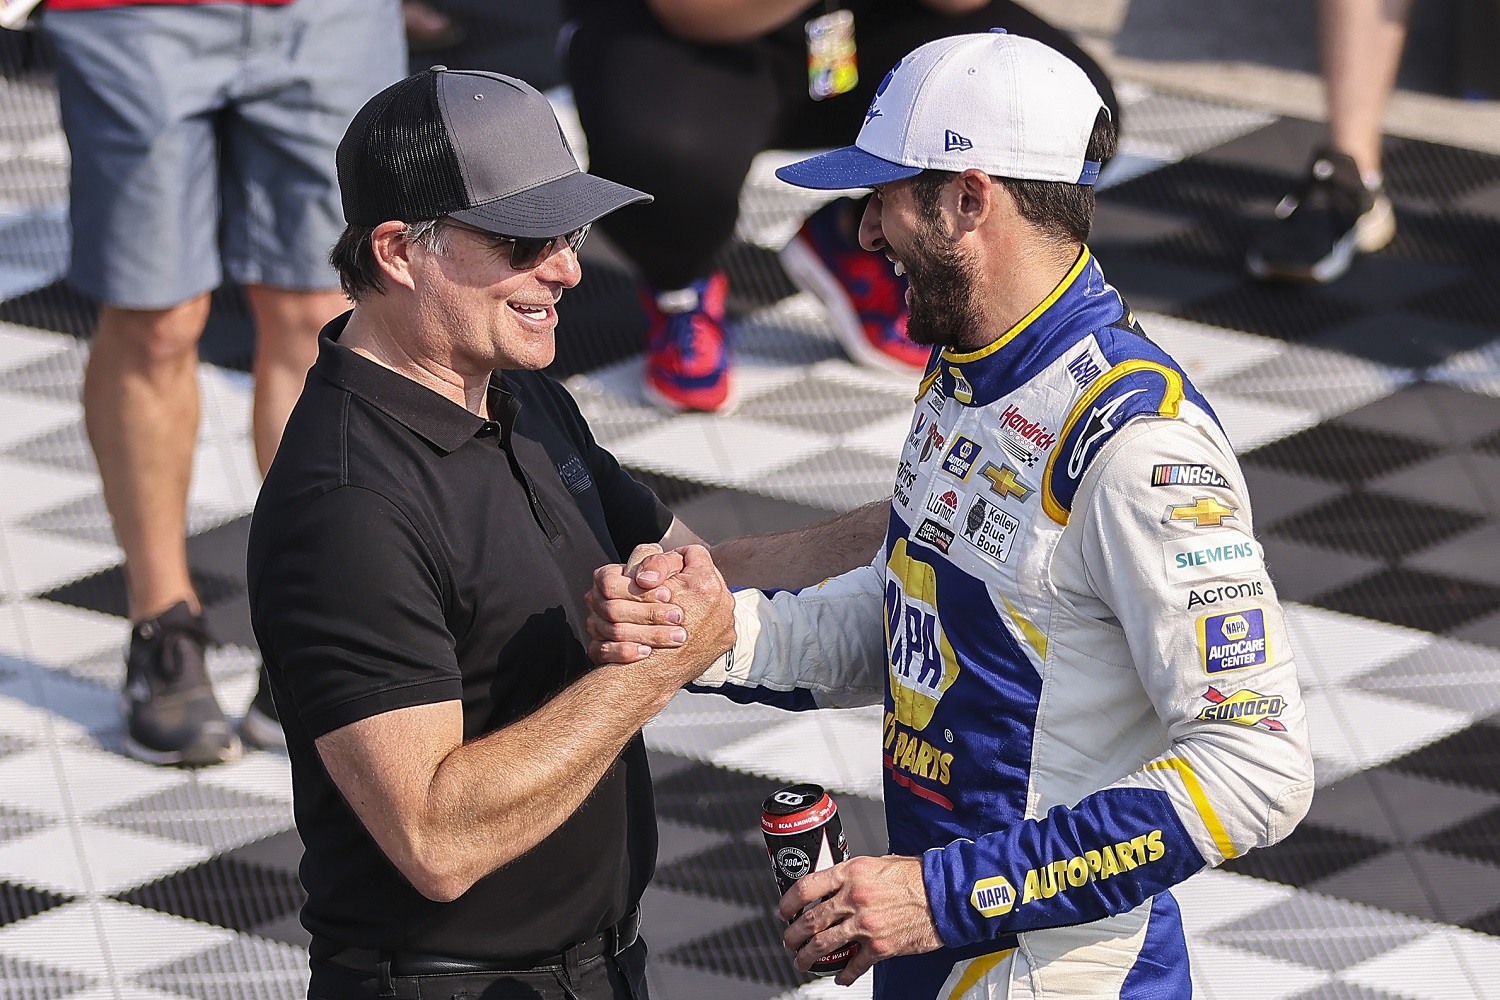 Jeff Gordon congratulates Chase Elliott, driver of the No. 9 Chevrolet, after winning the NASCAR Cup Series Jockey Made in America 250 at Road America on July 4, 2021 in Elkhart Lake, Wisconsin.